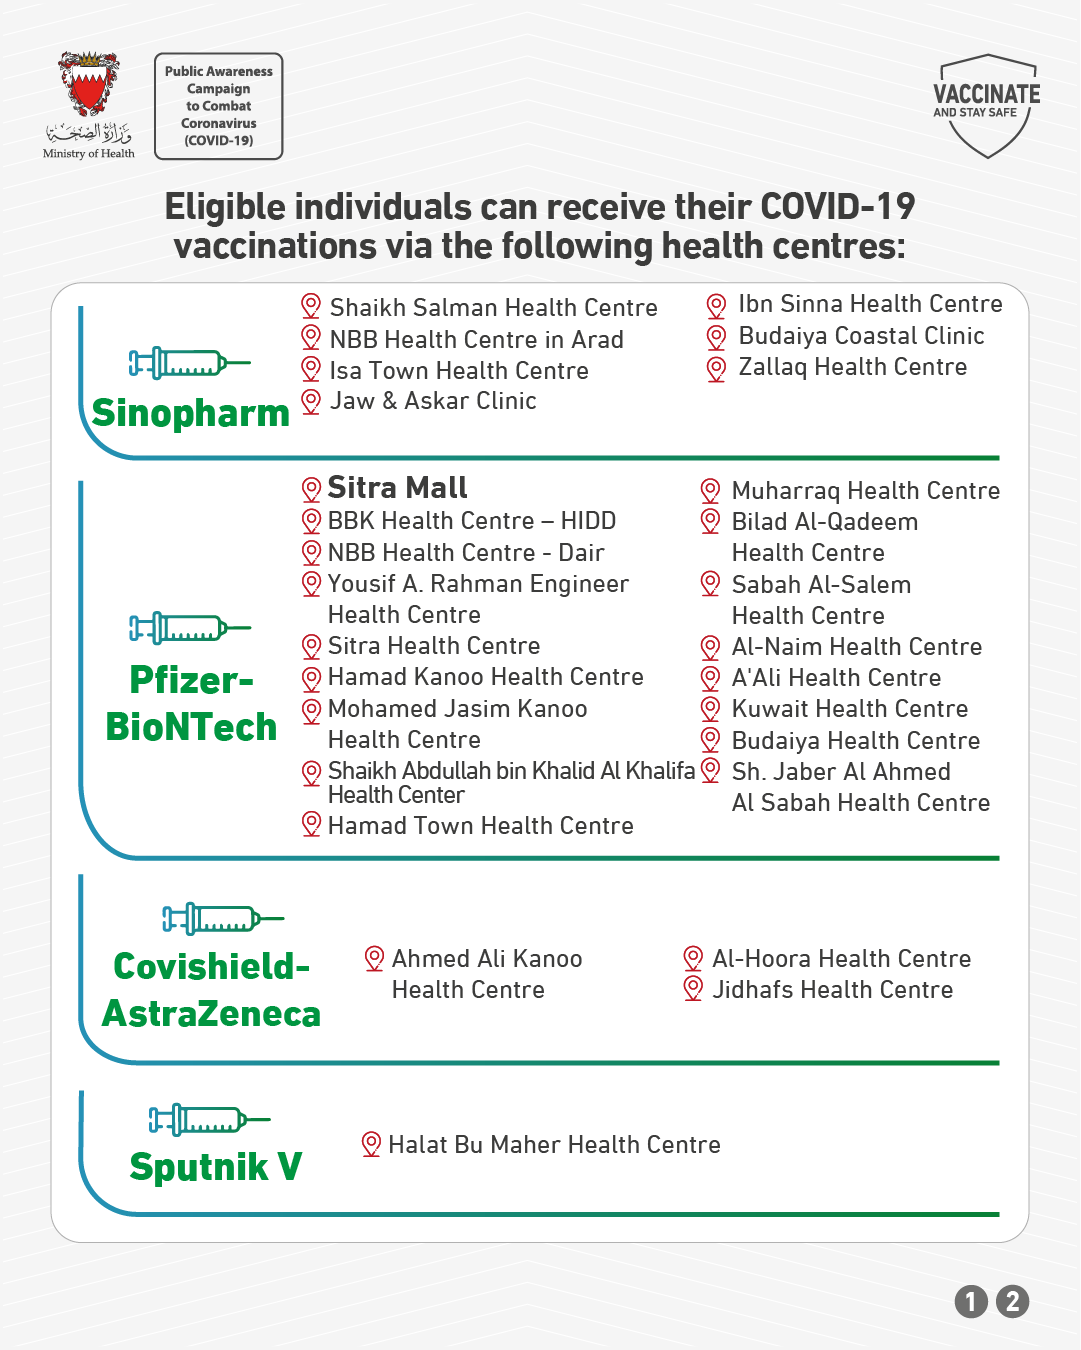 Ministry of Health: Eligible individuals can receive their vaccinations across the Kingdom's health centres without the need to wait for an appointment message